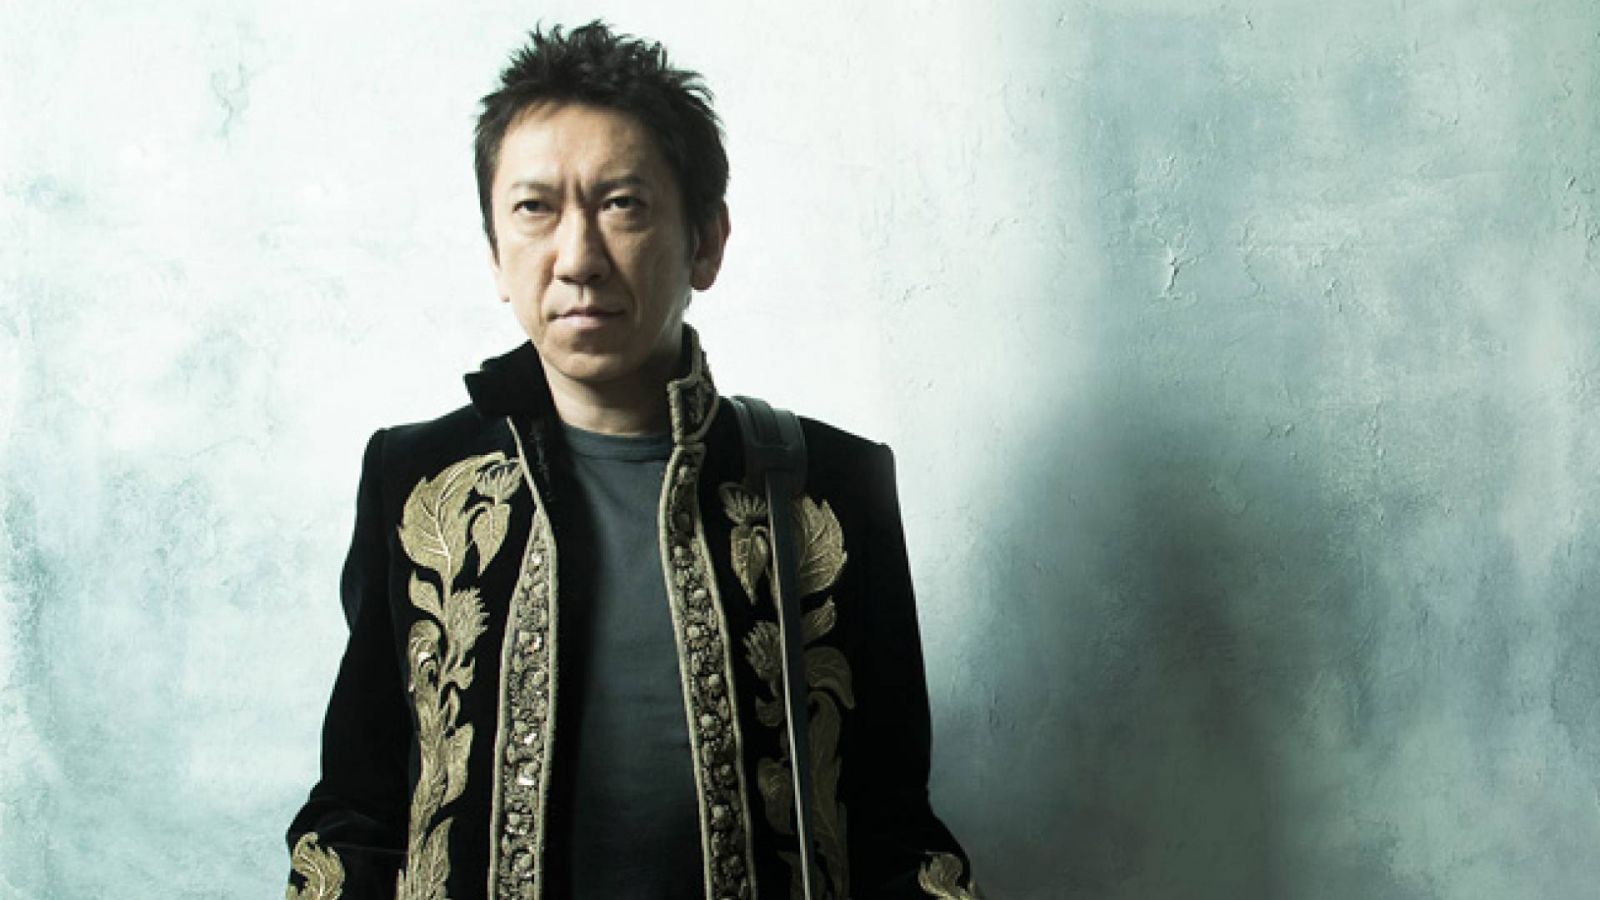 HOTEI Announces European Tour © UNIVERSAL MUSIC LLC. All rights reserved.